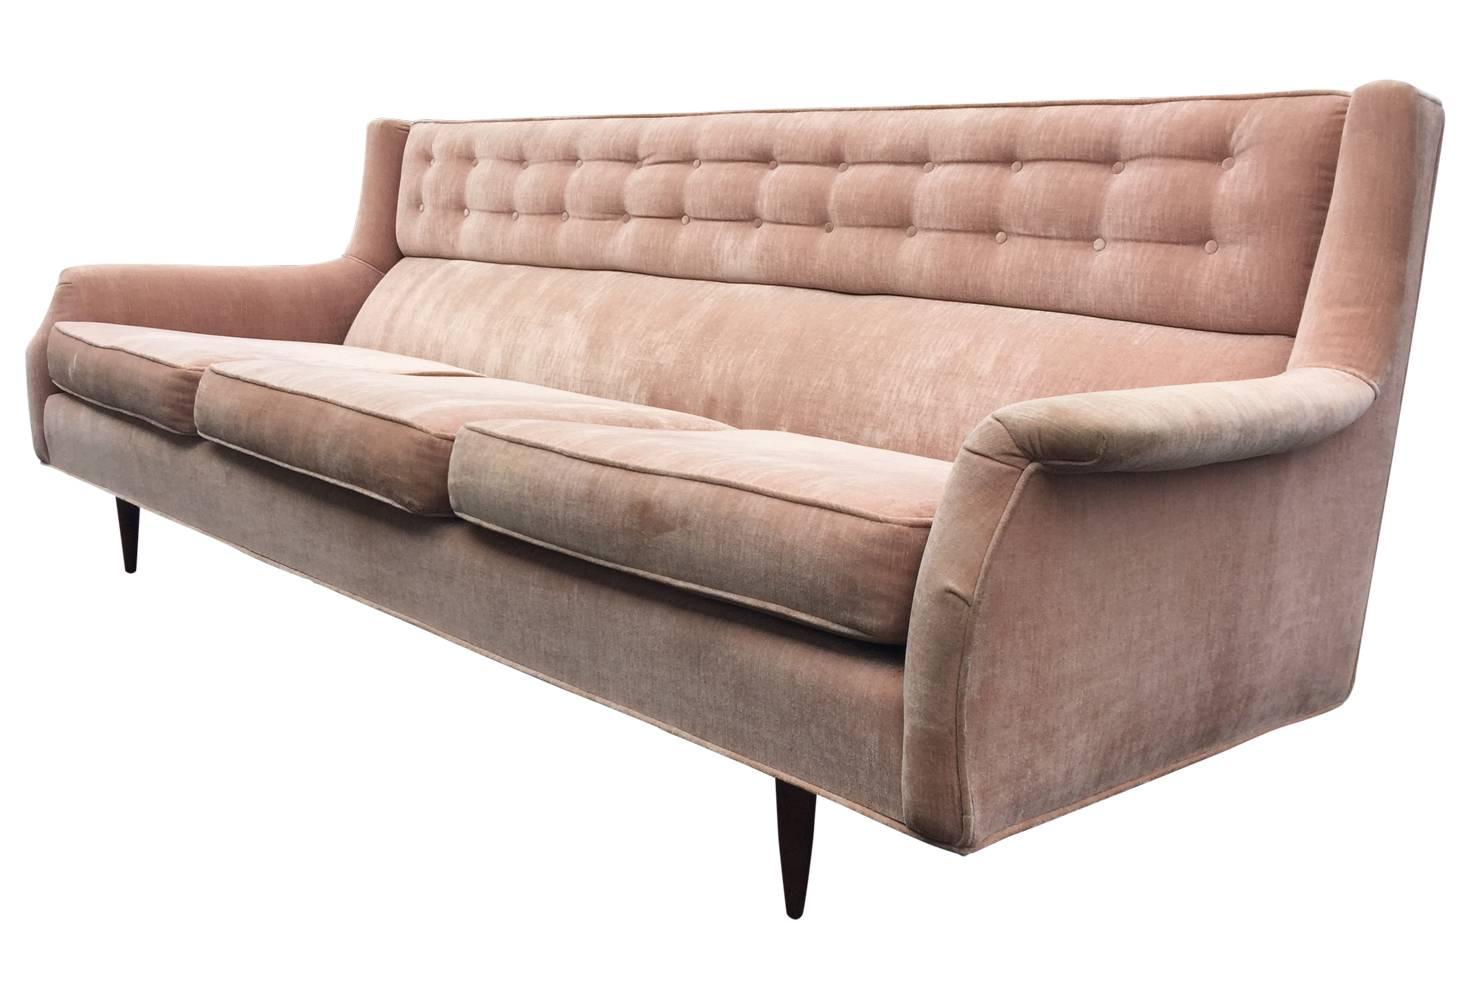 This sofa has lovely lines, walnut legs and a tufted headrest. The padded lumbar cushion makes it surprisingly comfortable. Velvet does show age and wear in the form of light fading, some staining on the underside of the seat cushions and one dime